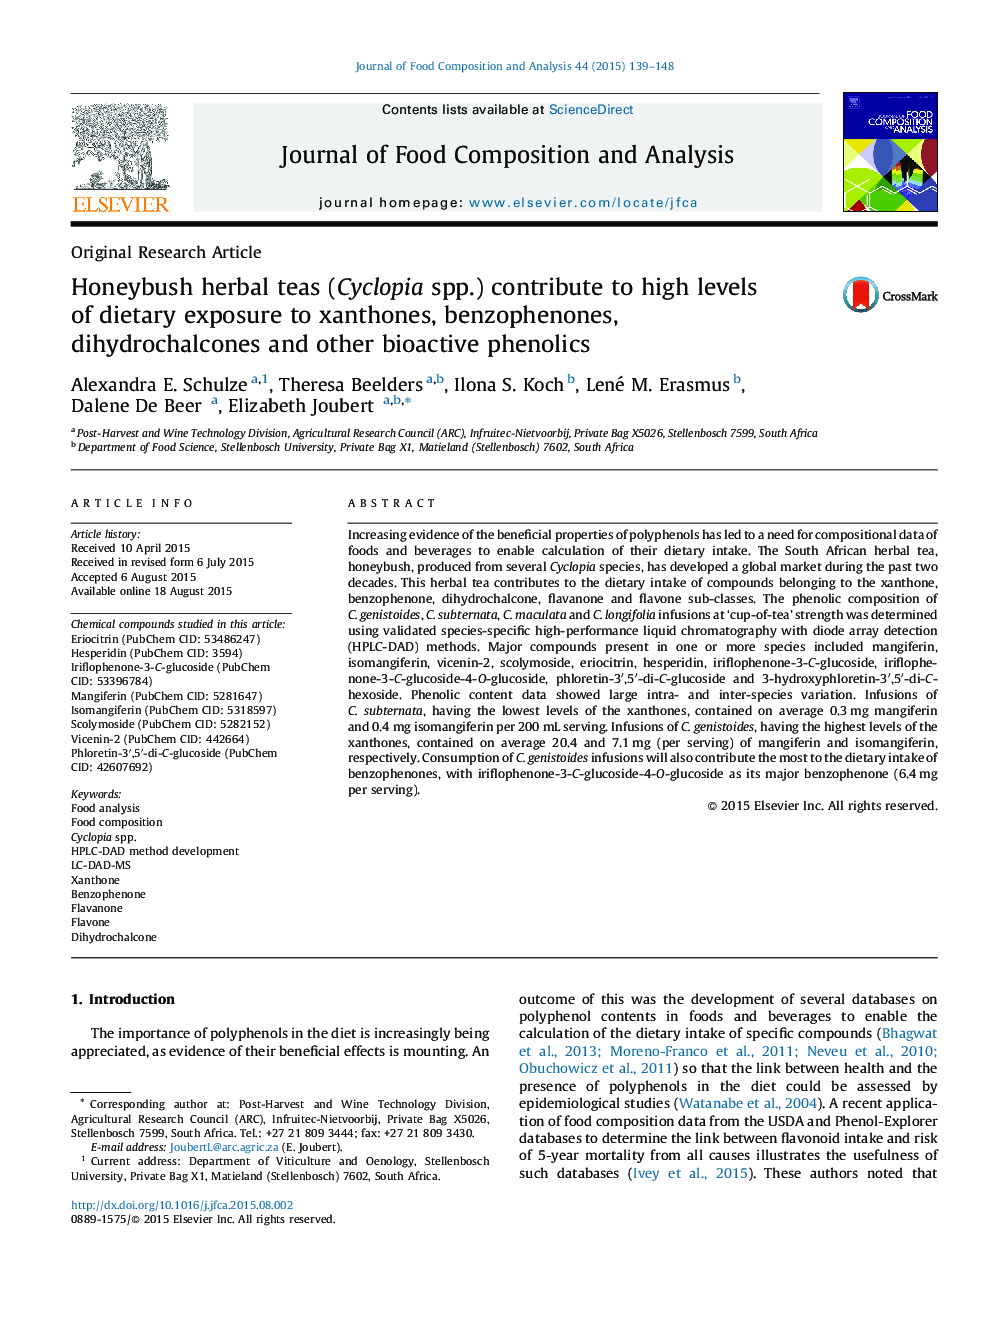 Honeybush herbal teas (Cyclopia spp.) contribute to high levels of dietary exposure to xanthones, benzophenones, dihydrochalcones and other bioactive phenolics